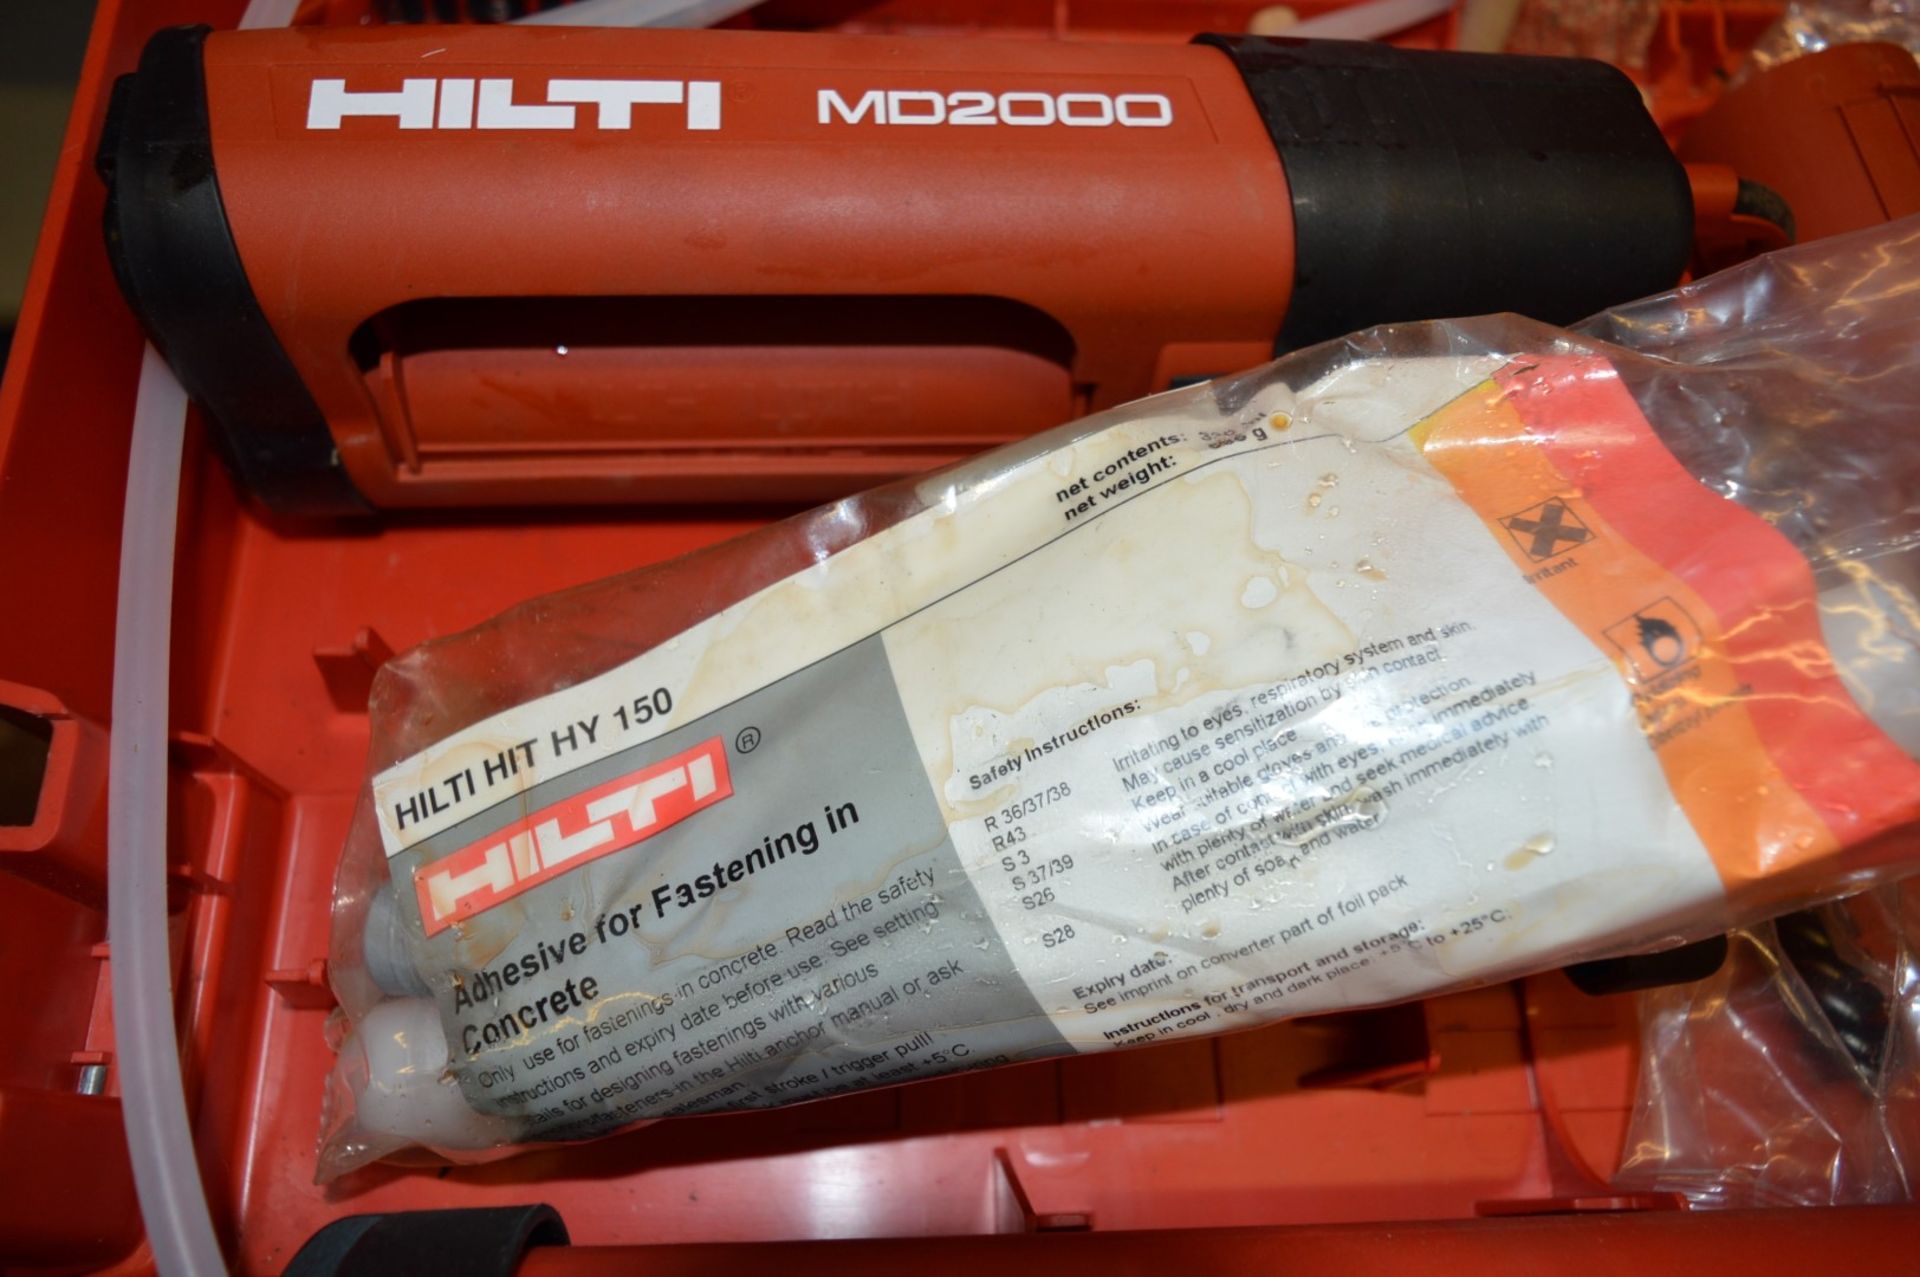 1 x Hilti MD2000 Manual HIT Adhesive Dispenser With Case, Accessories and HIT-HY 150 Pack - Ref: - Image 4 of 7